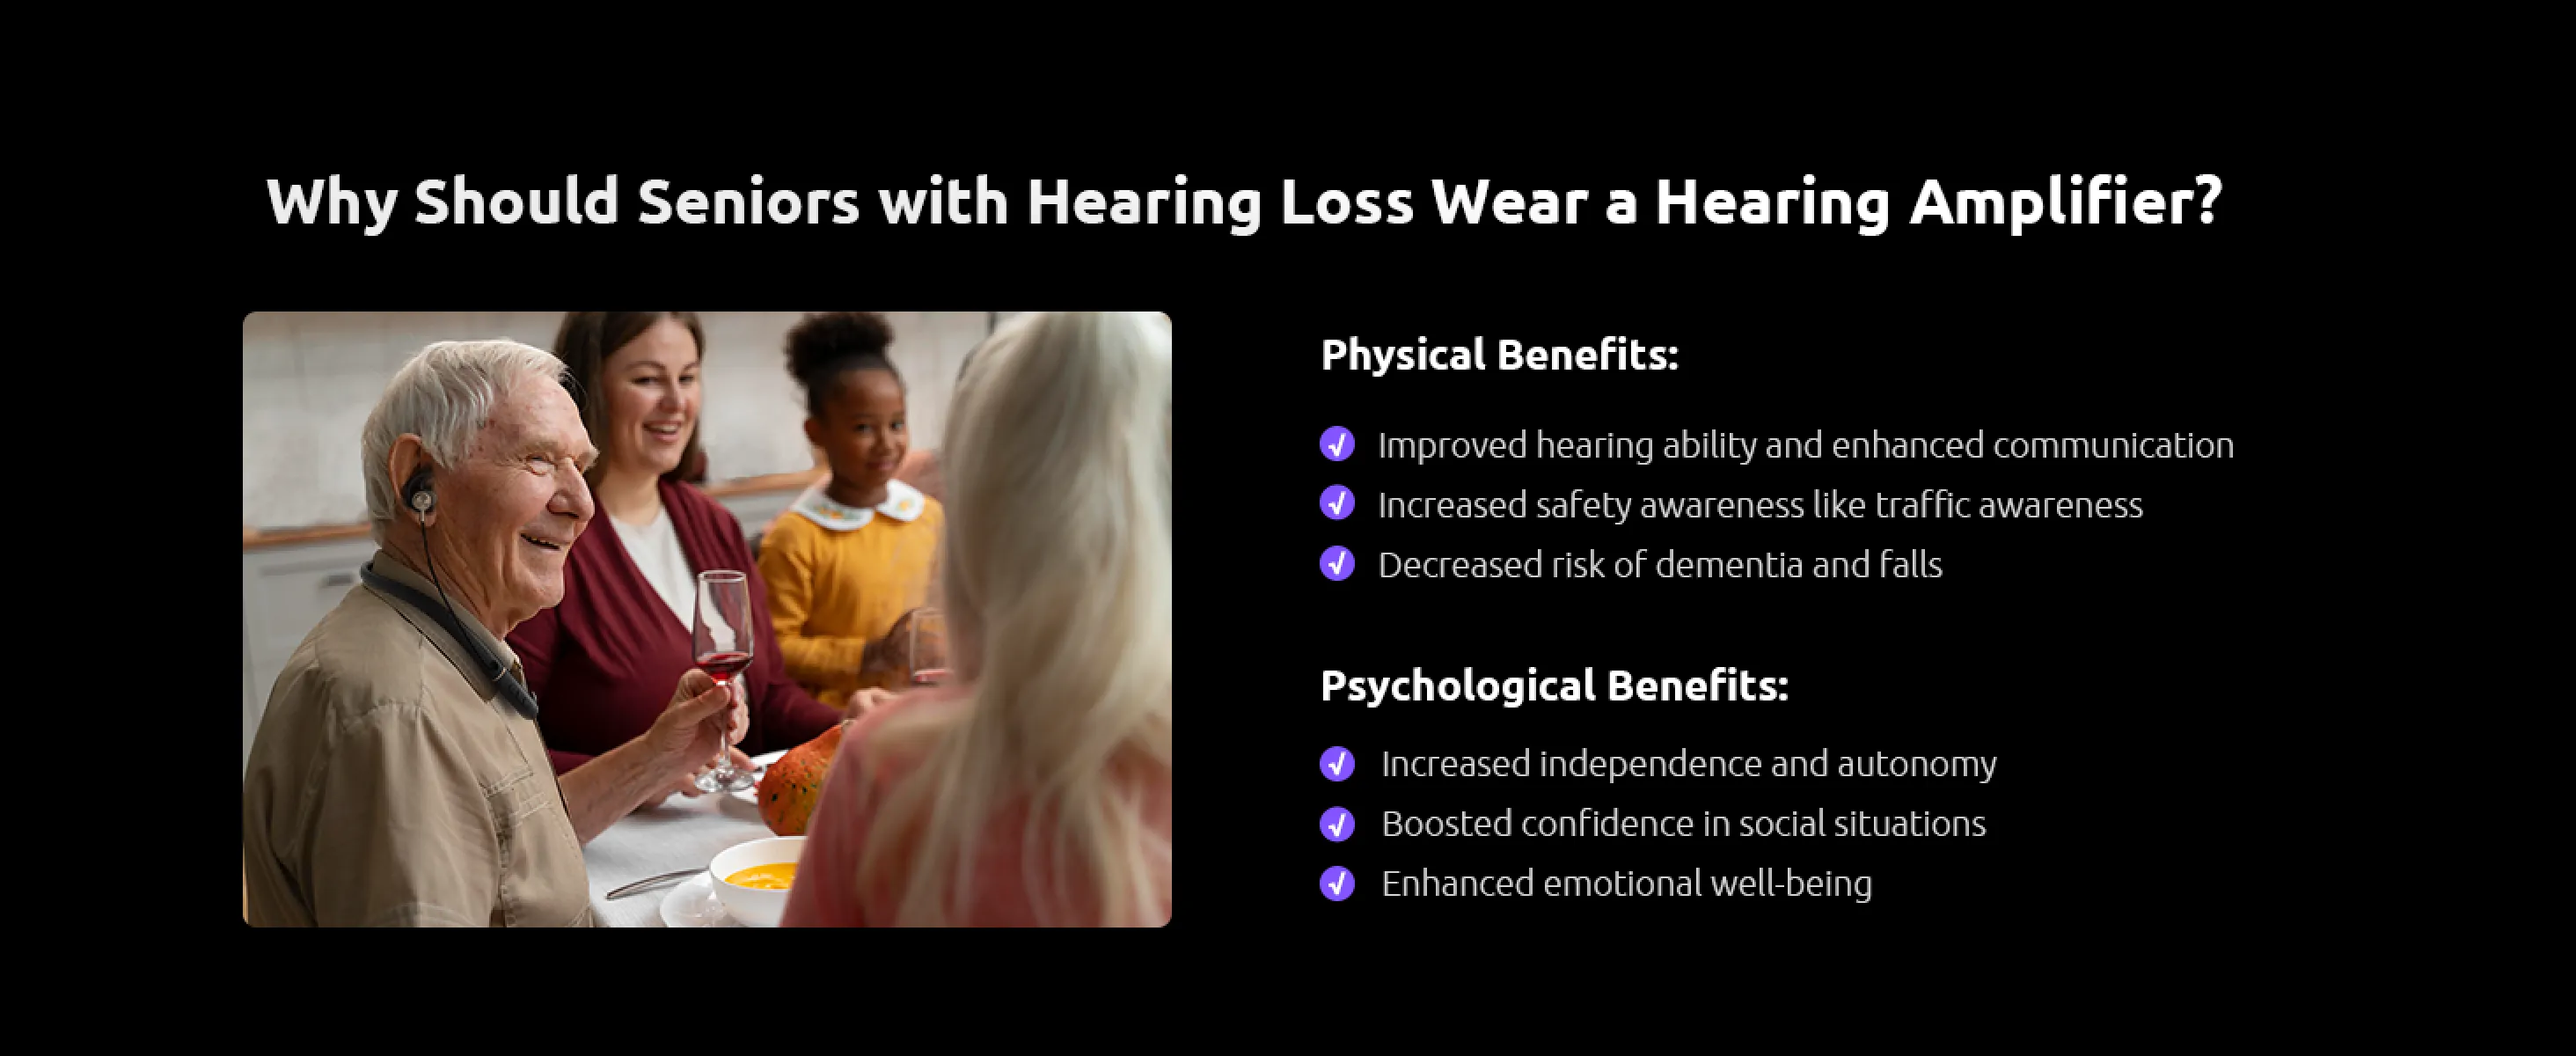 Benefits of Hearing Aid